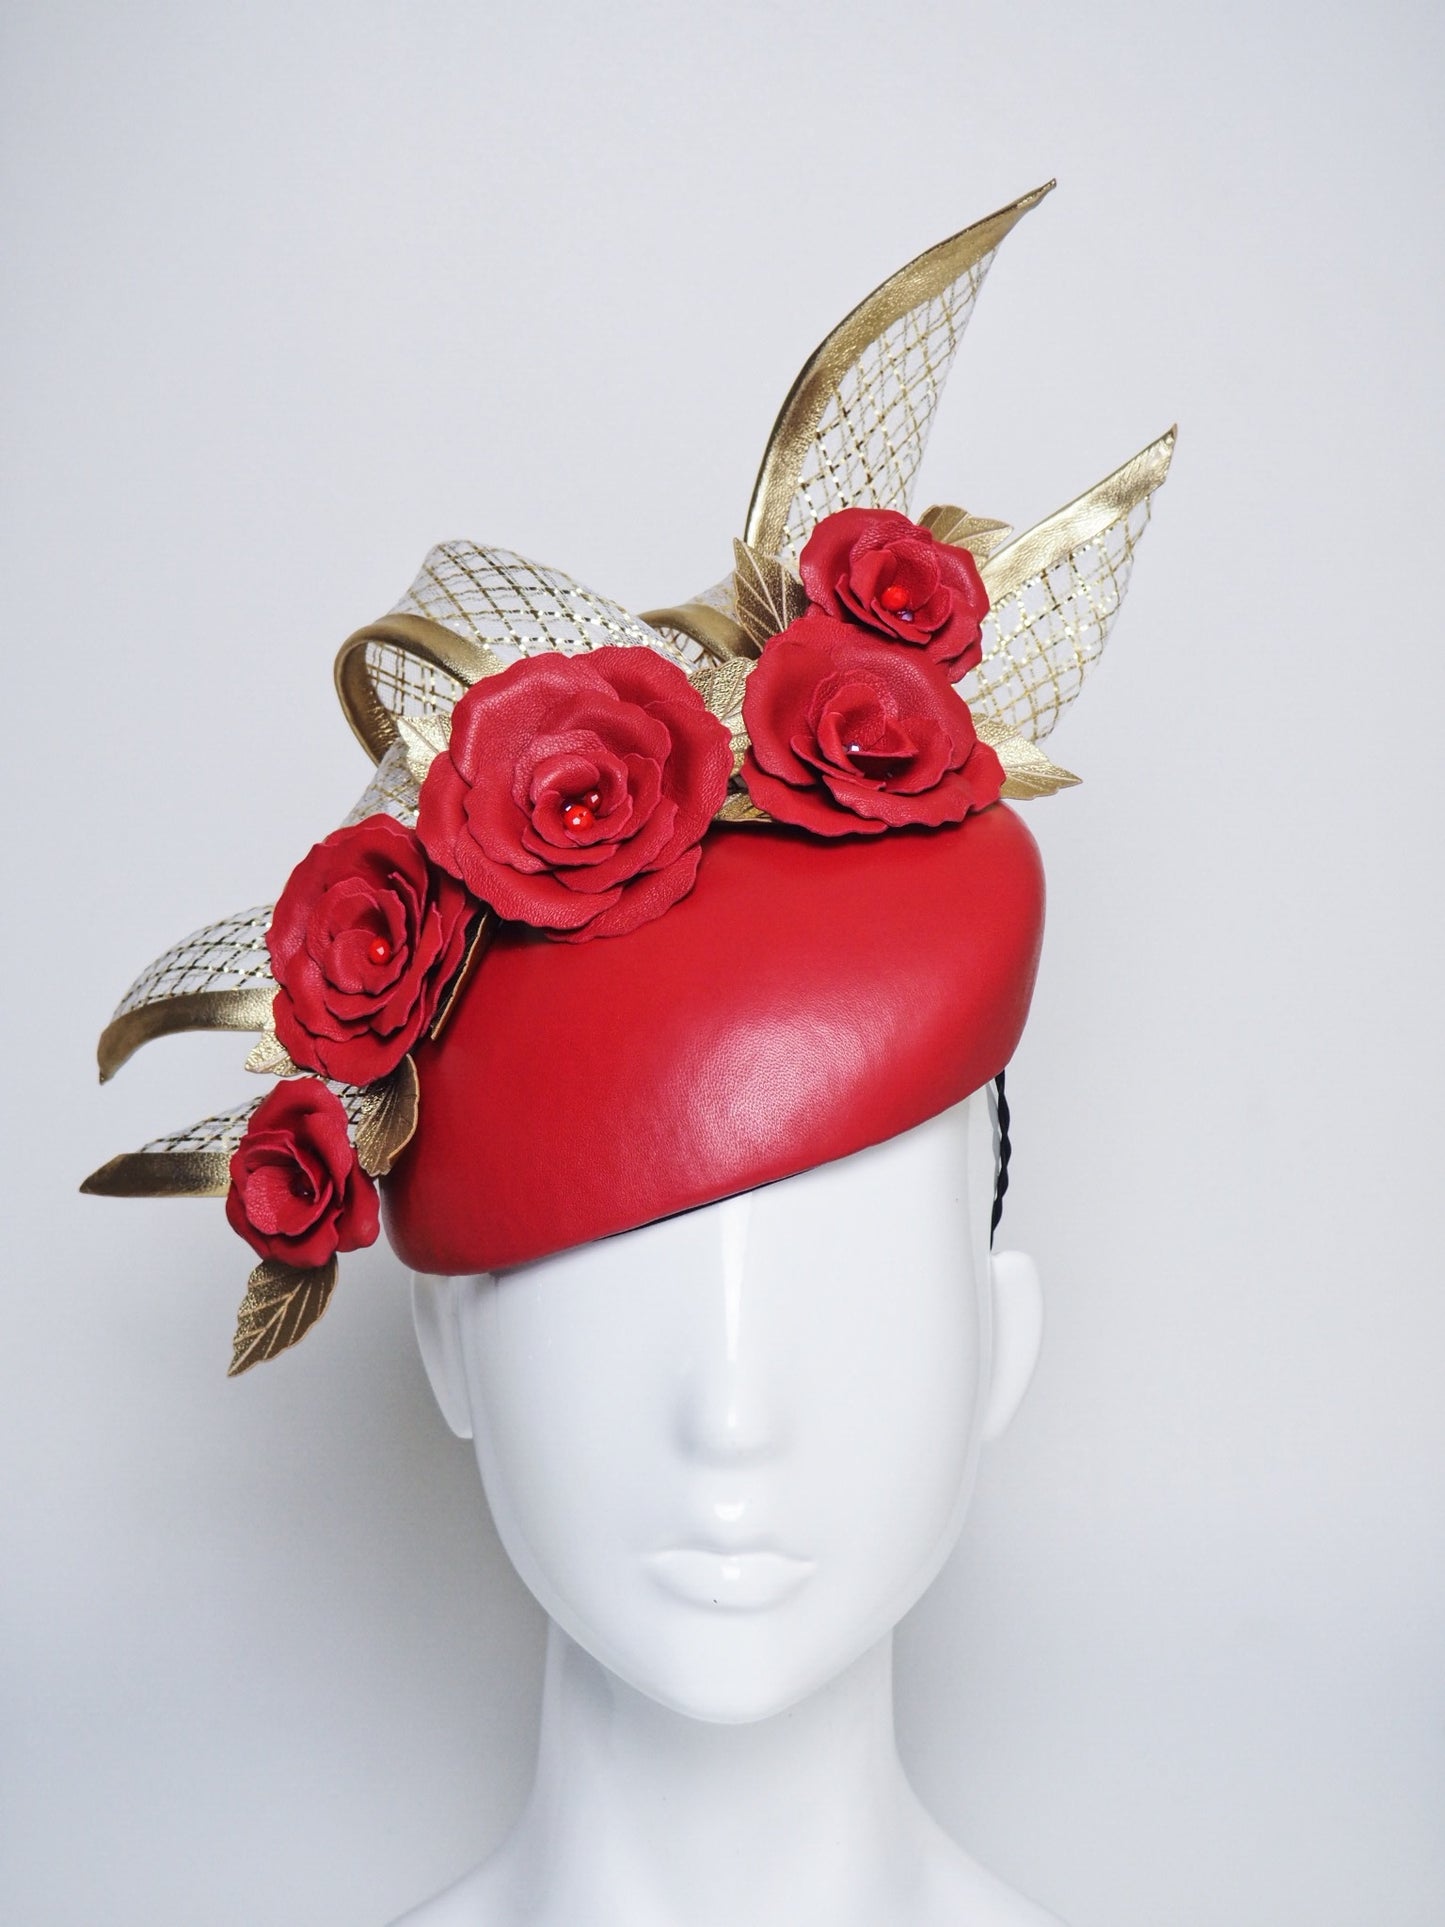 Royal flush - Red leather base with gold crinoline details